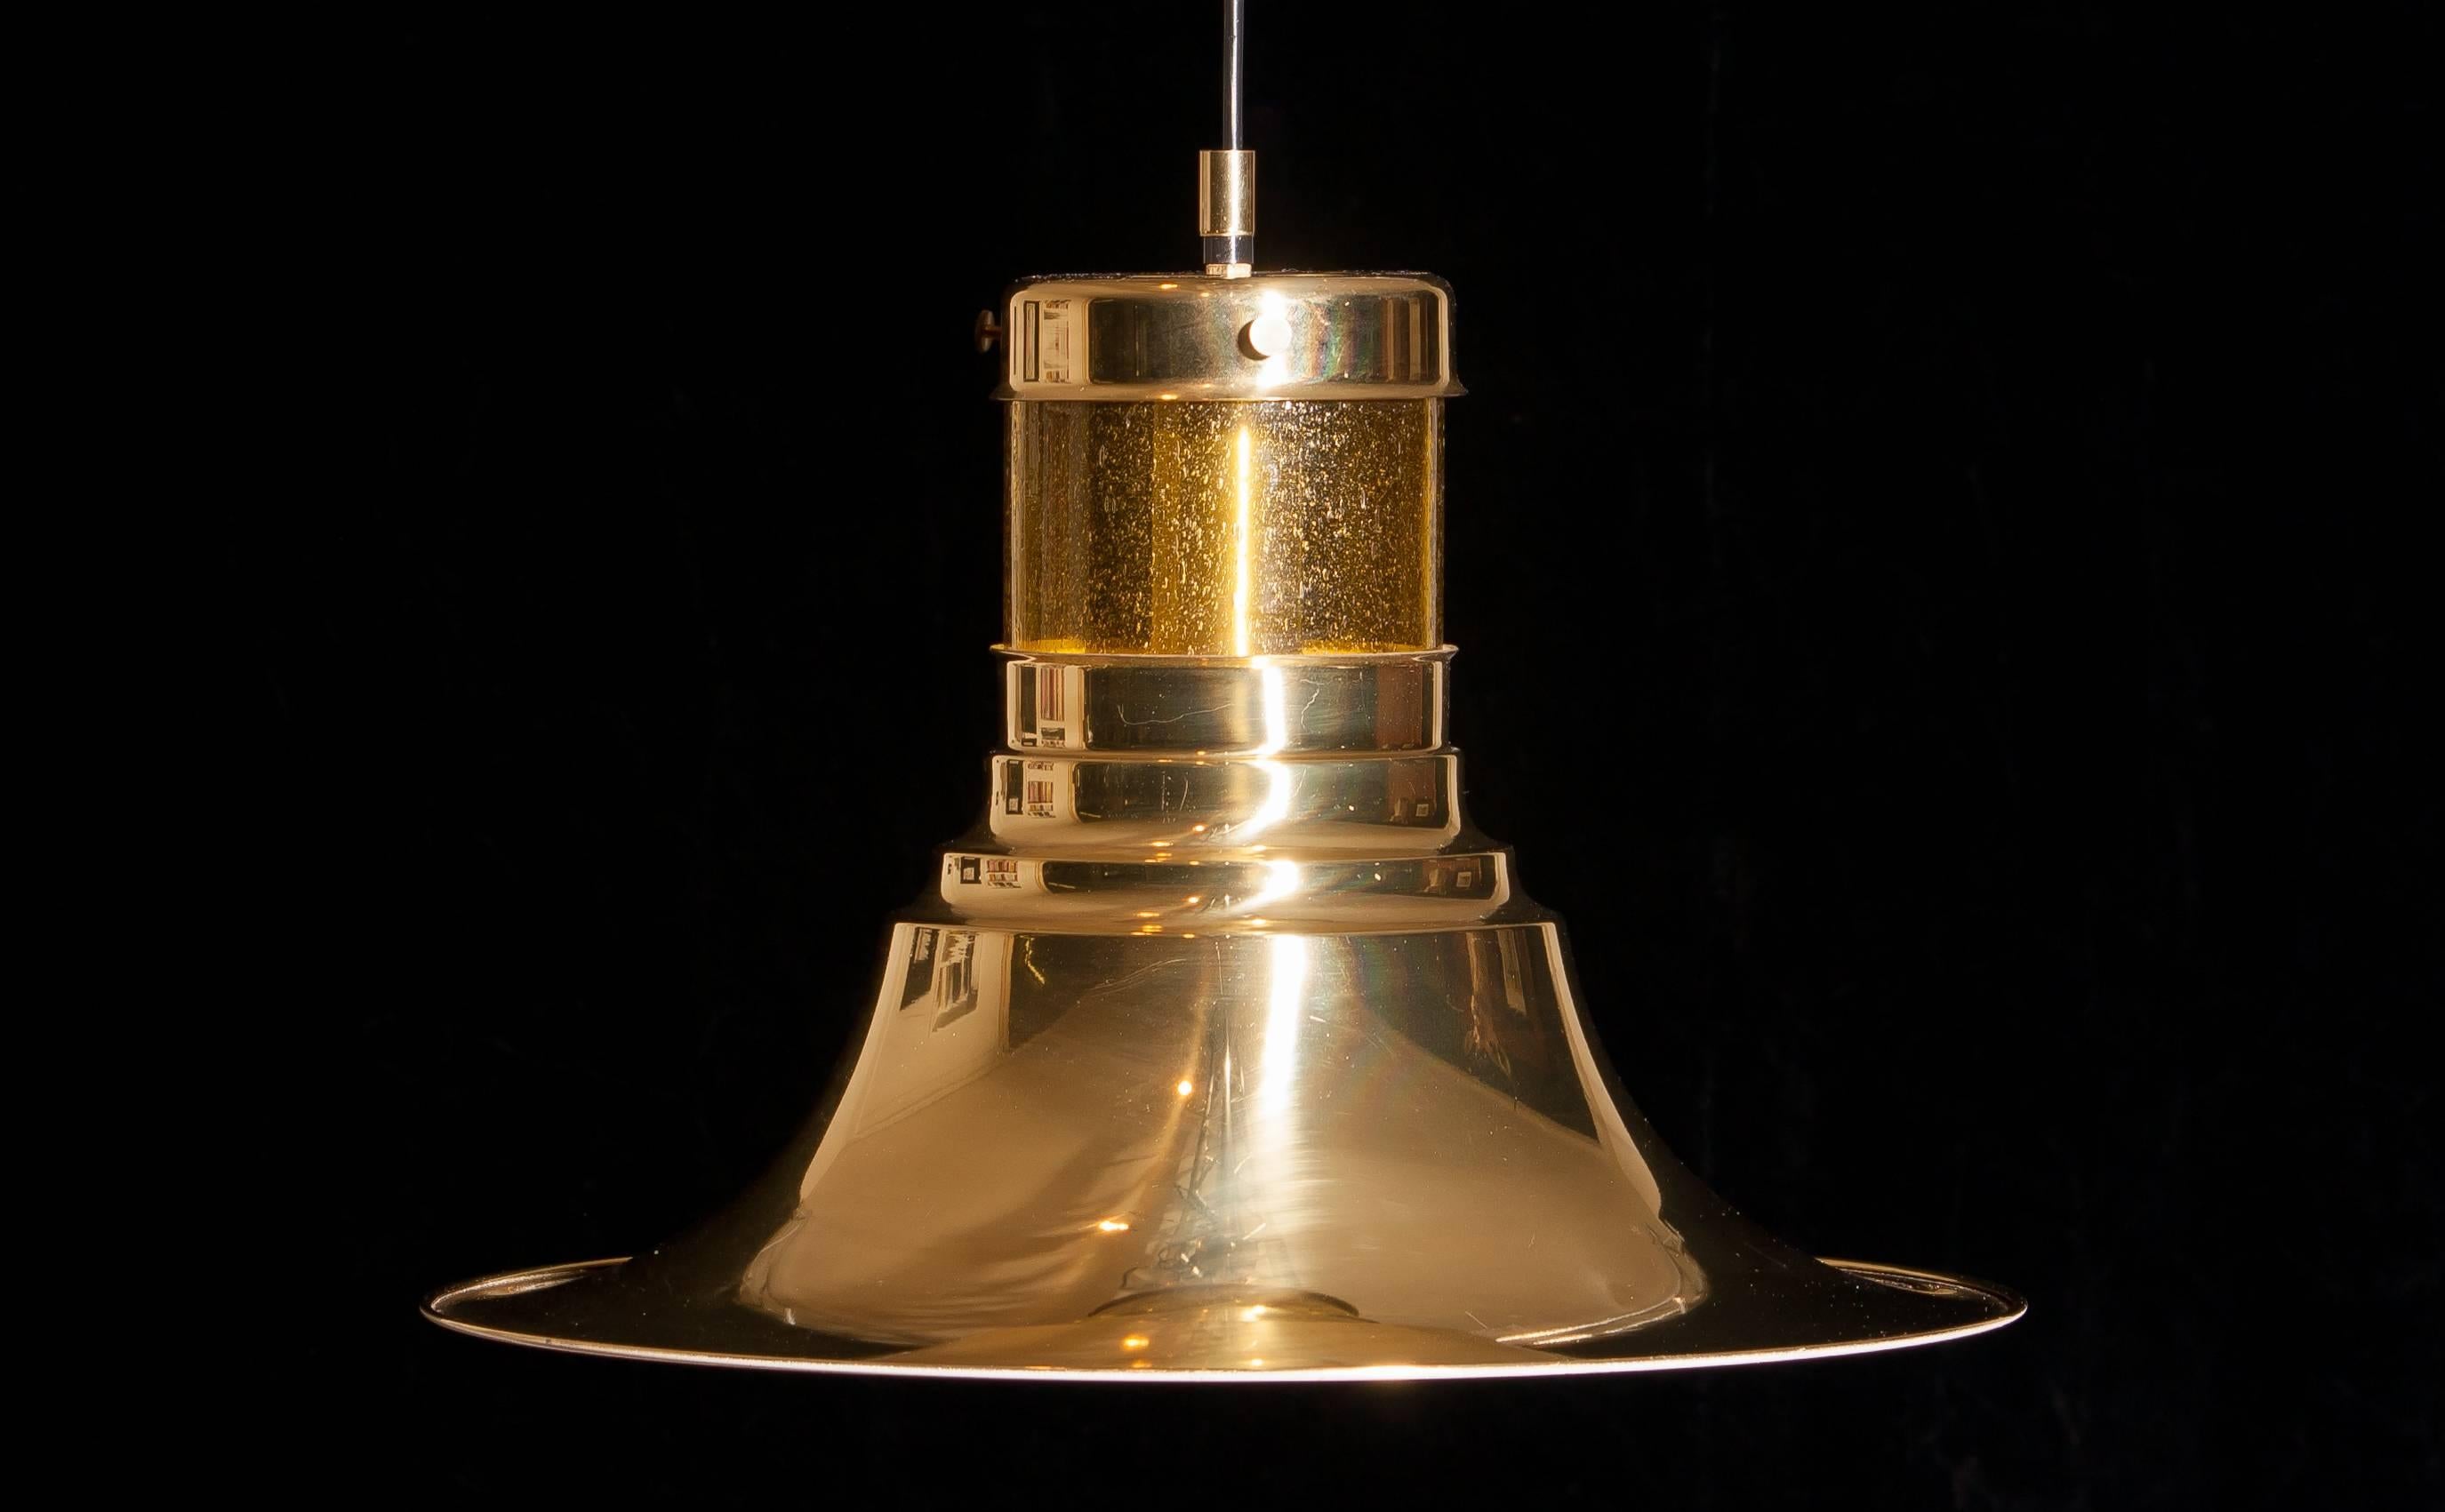 Magnificent pendant designed by Börje Claes for Norellet, Sweden.
This lamp is made of brass with an enamel white inside and a yellow cylinder of glass.
The beautiful shape makes that it gives a wonderful shining.
Period 1970s.
Dimensions: H 32